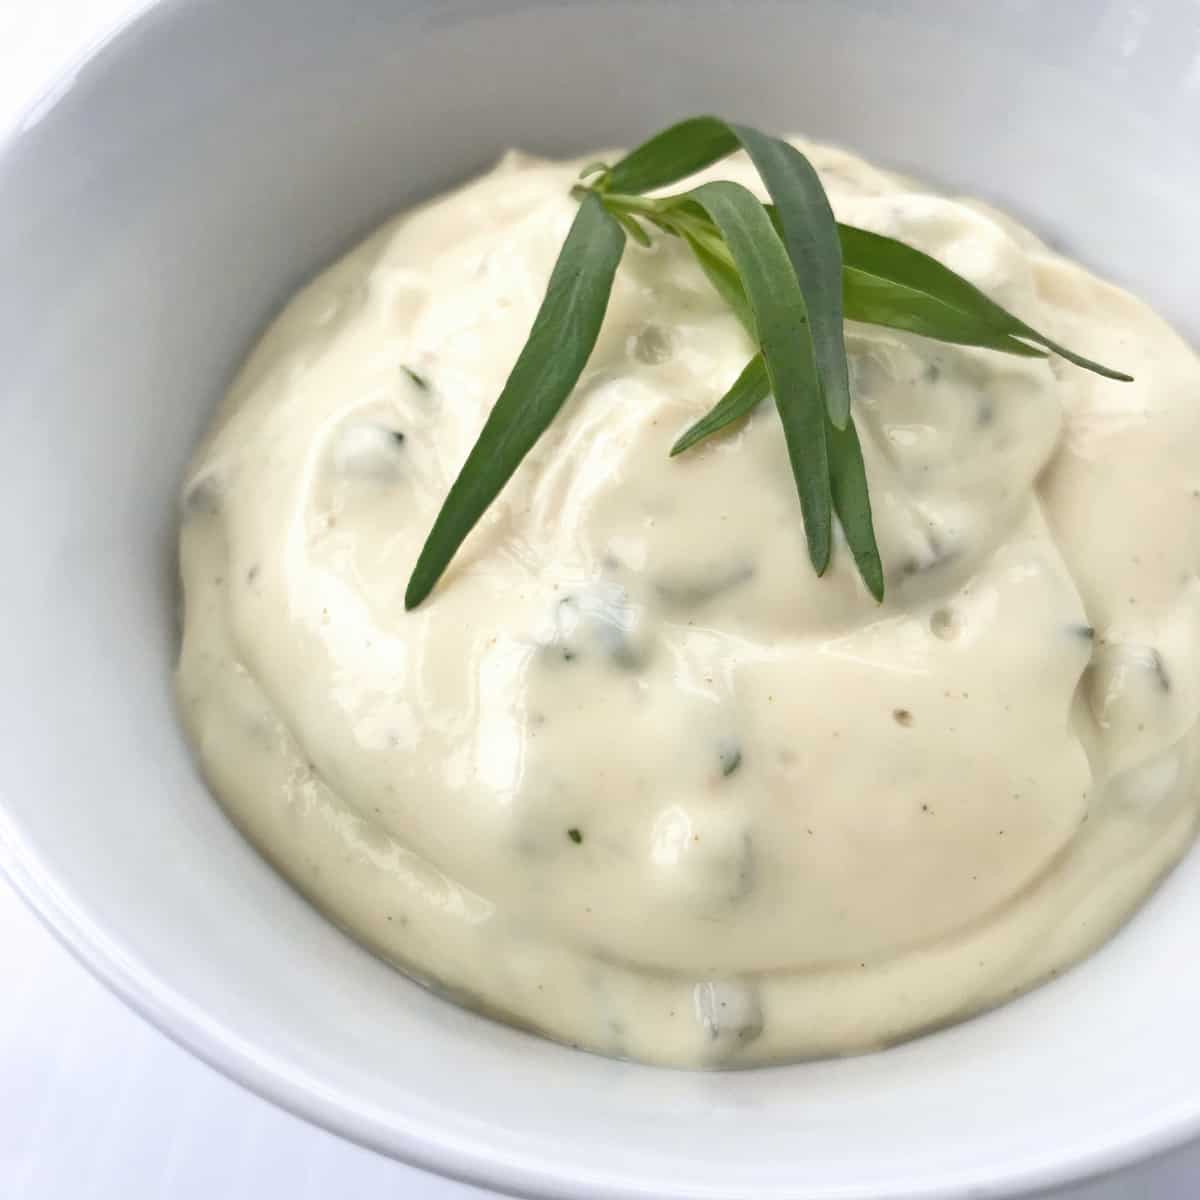 remoulade recipe best classic french sauce condiment mayonnaise pickles cornichons tarragon